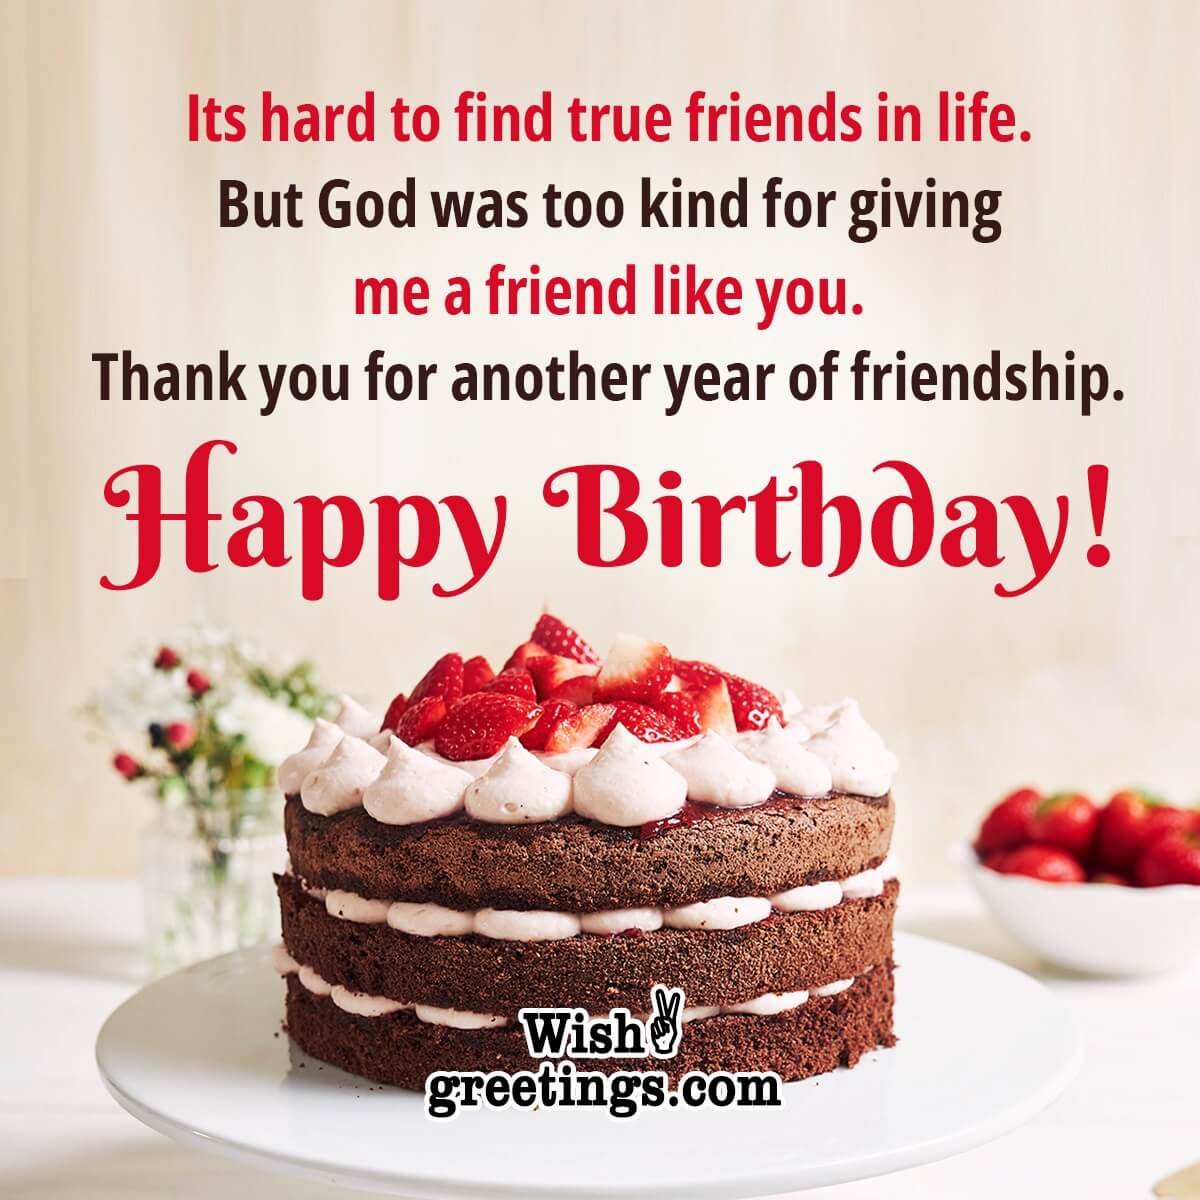 happy birthday wishes to a special friend